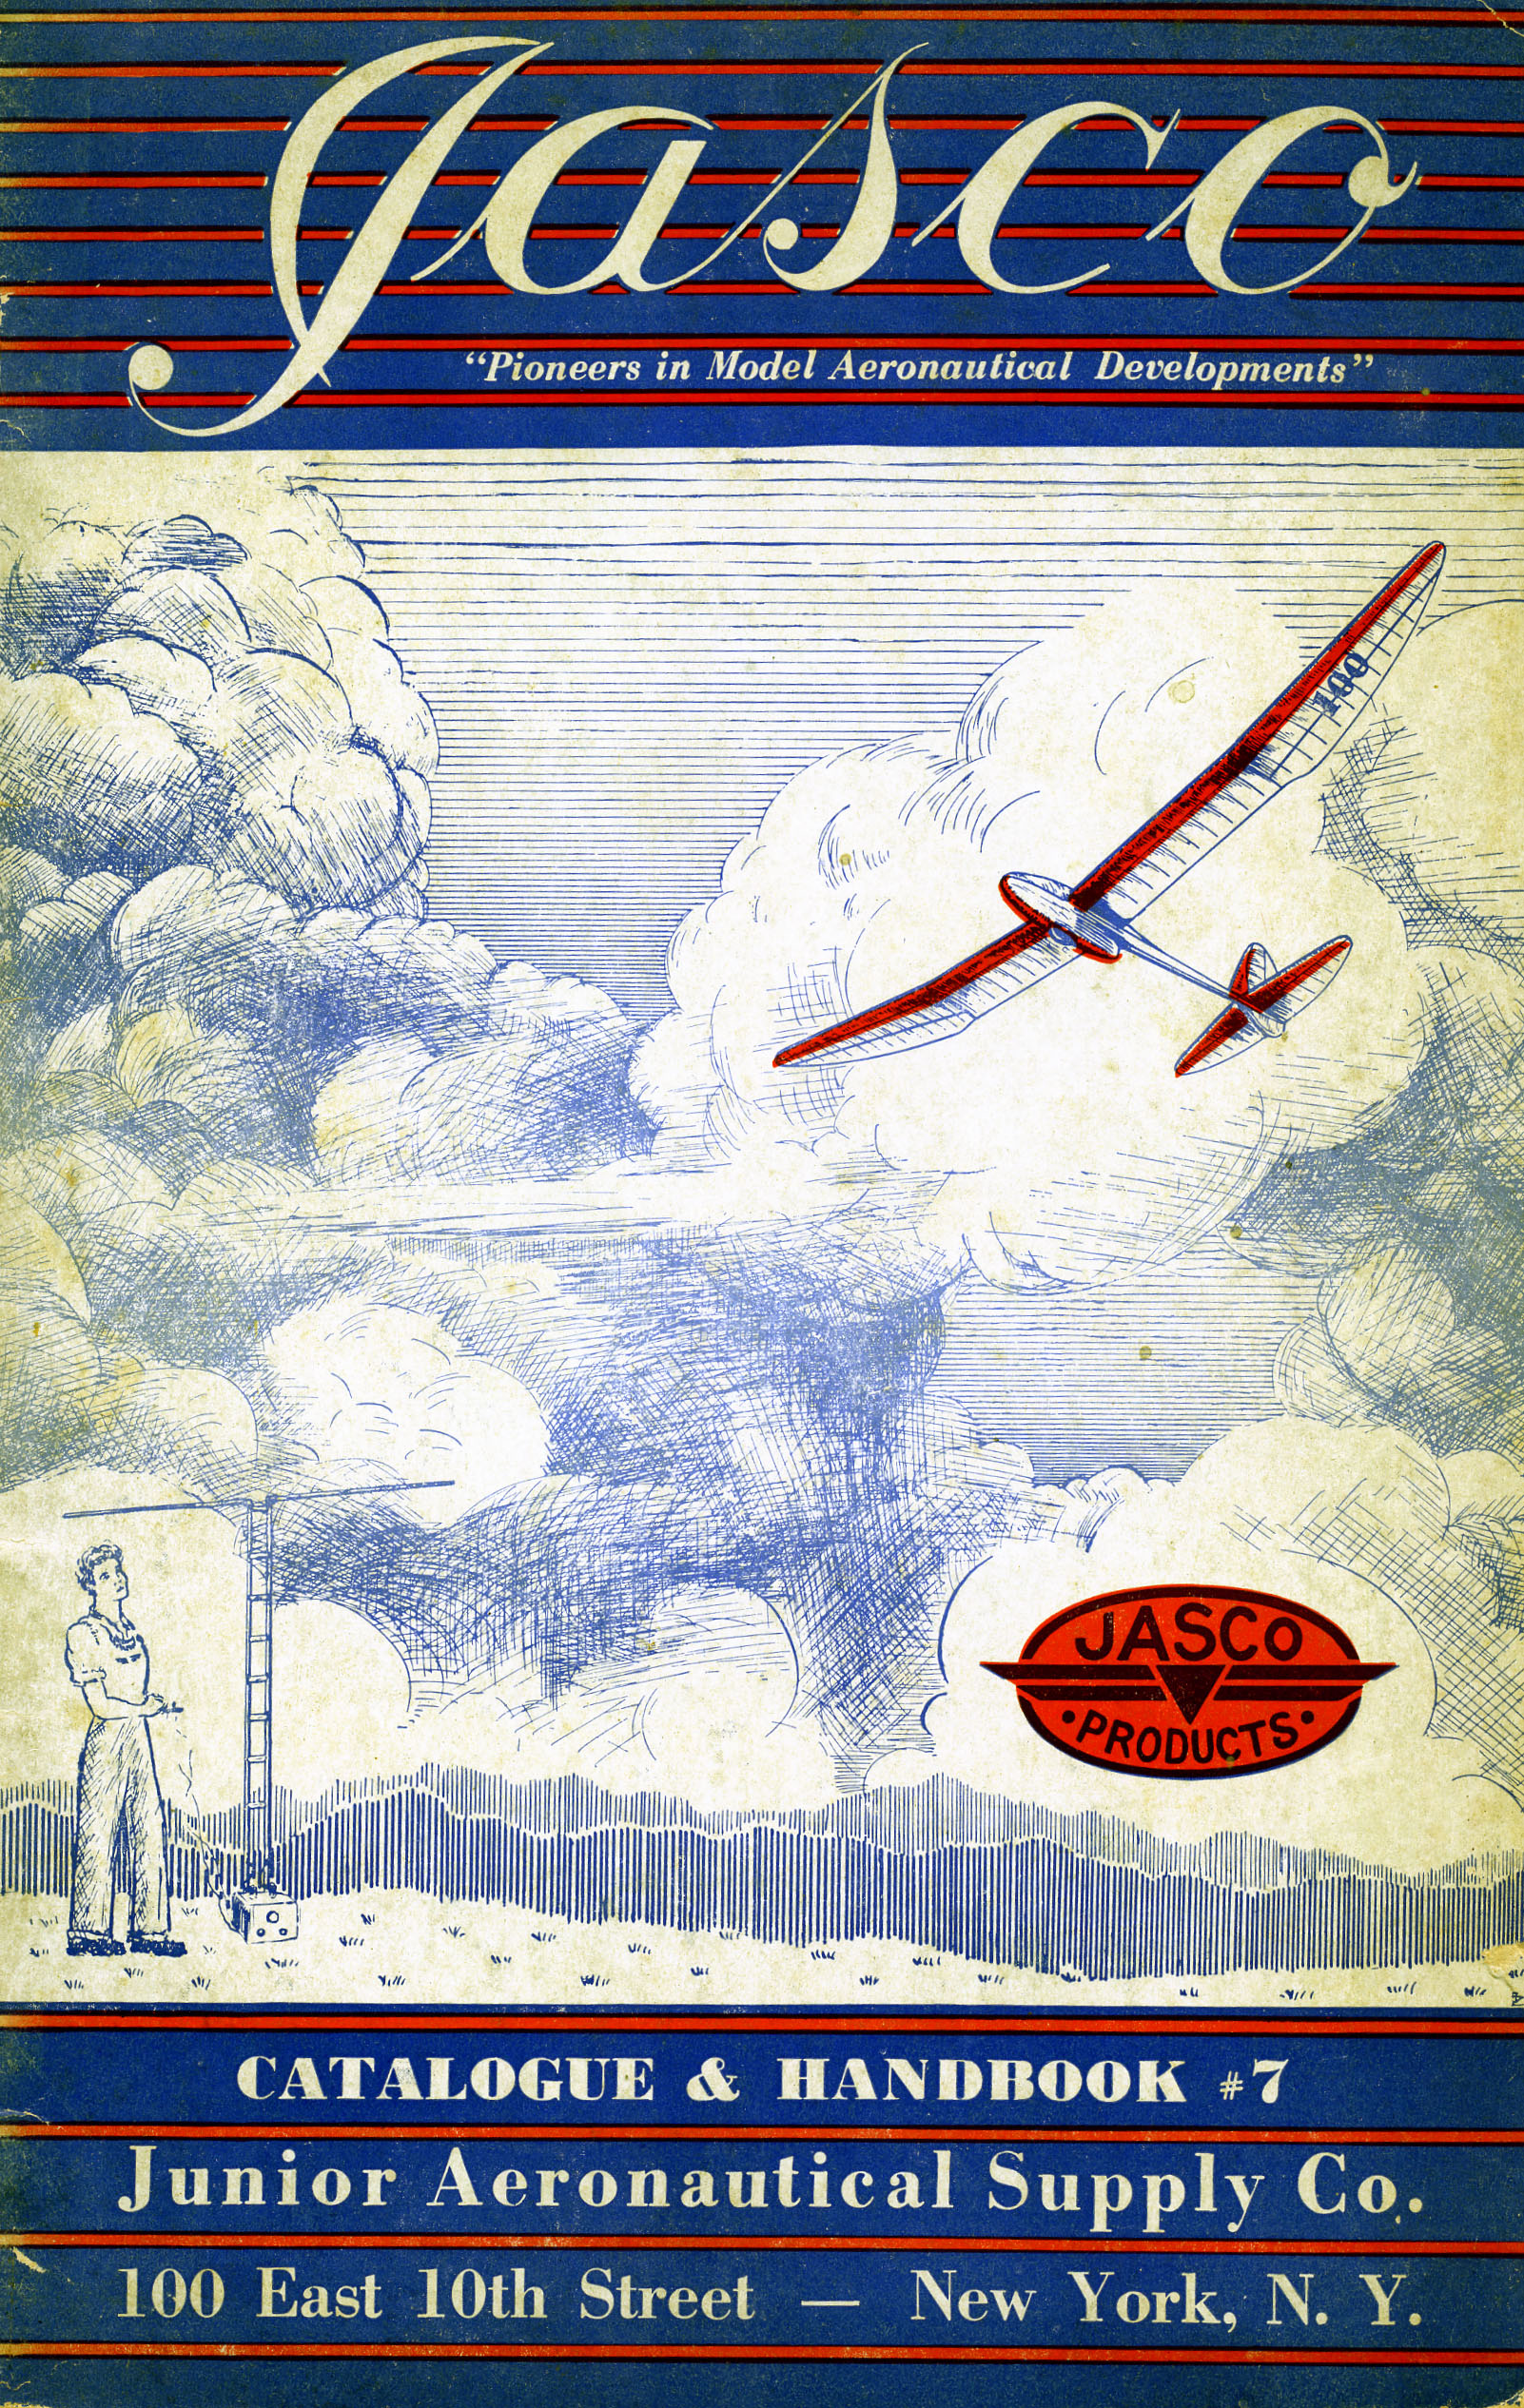 Catalog, JASCO, 1940 - front. (Source: National Model Aviation Museum Archives, Manufacturers and Companies Collection #0043)